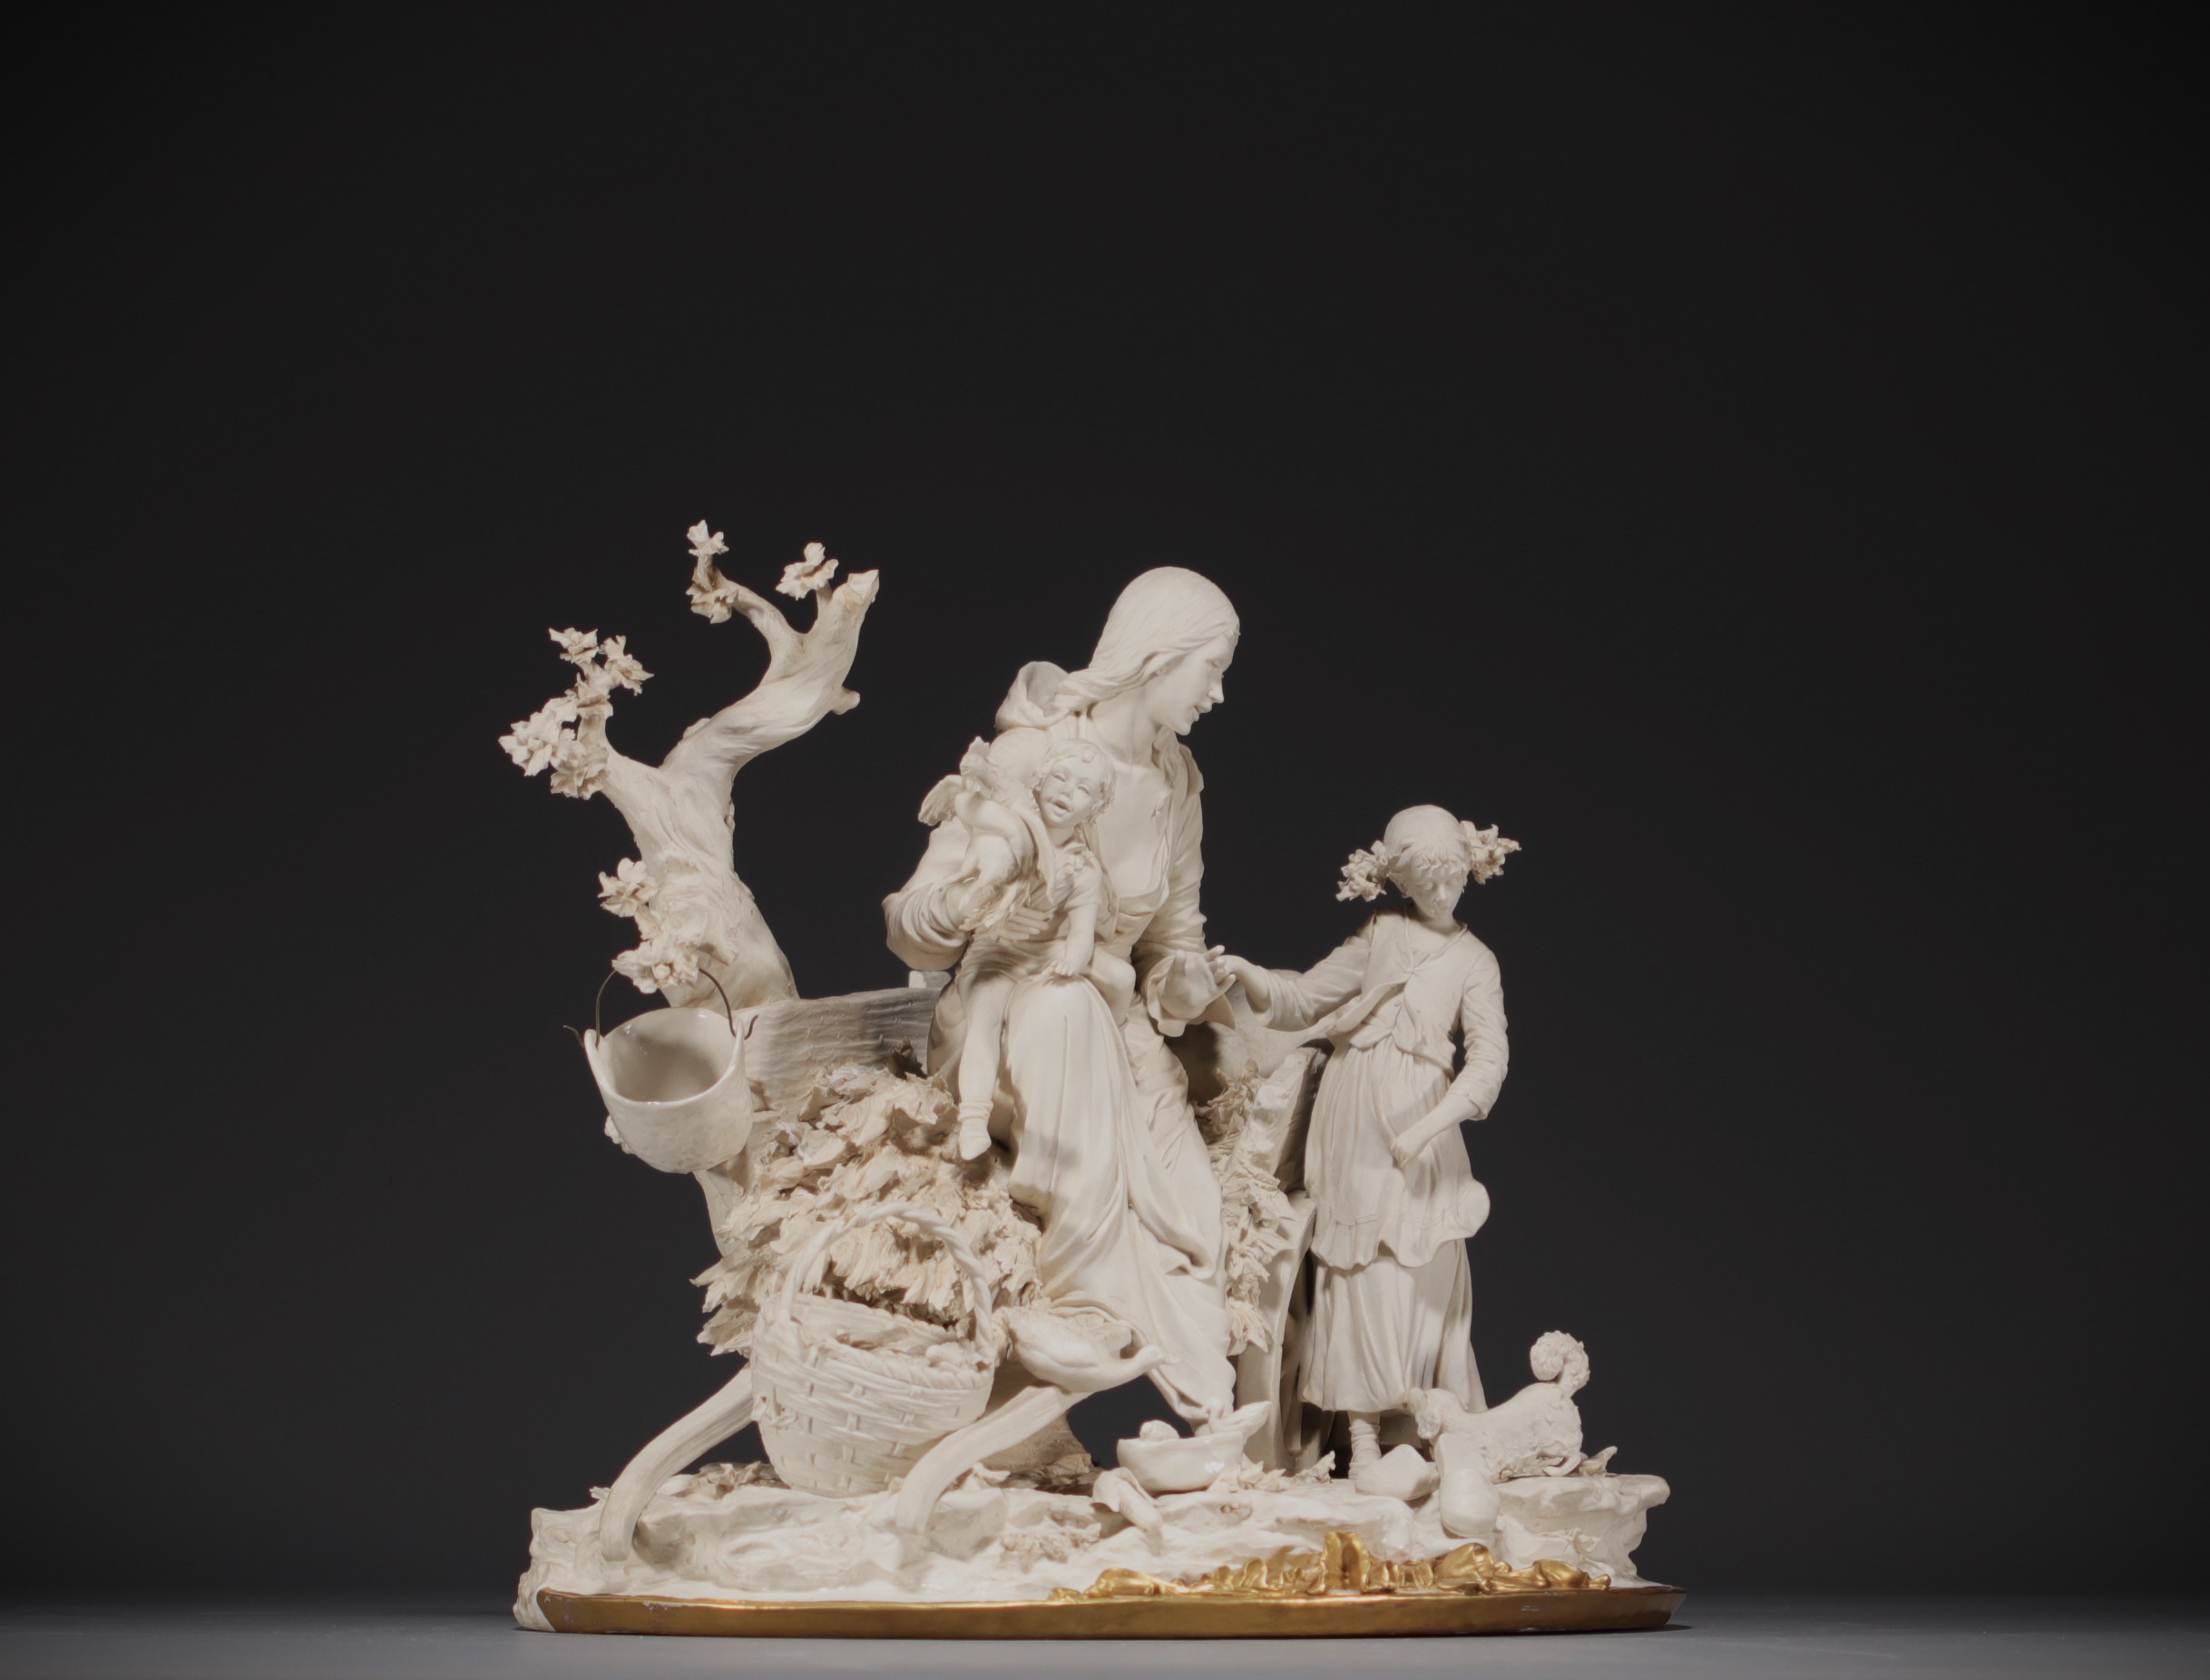 Capodimonte - "The Family" Imposing group in biscuit and enamelled porcelain, blue mark on the base. - Image 3 of 6